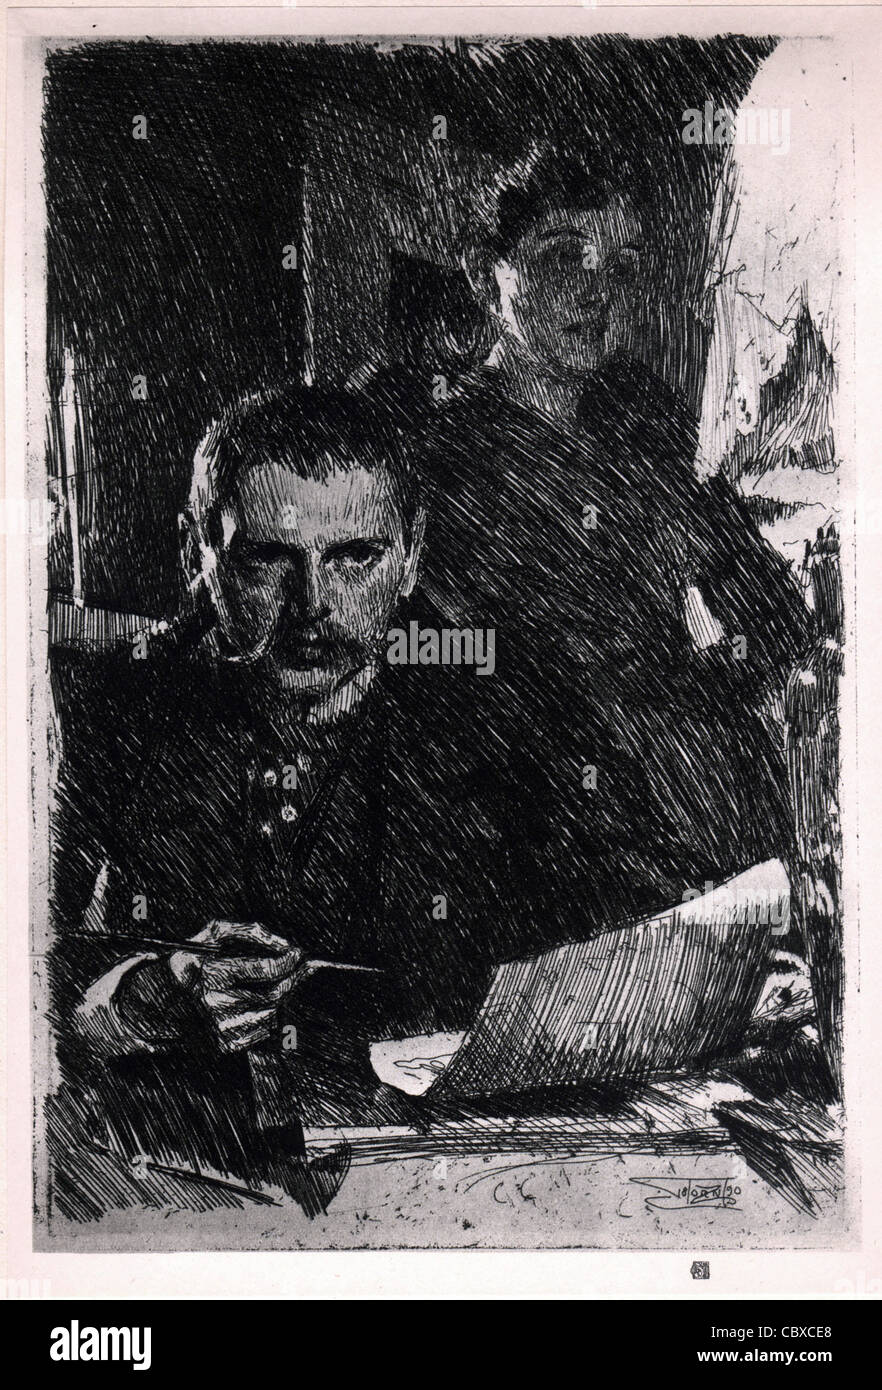 Anders Zorn Selfportrait Etching Stock Photo